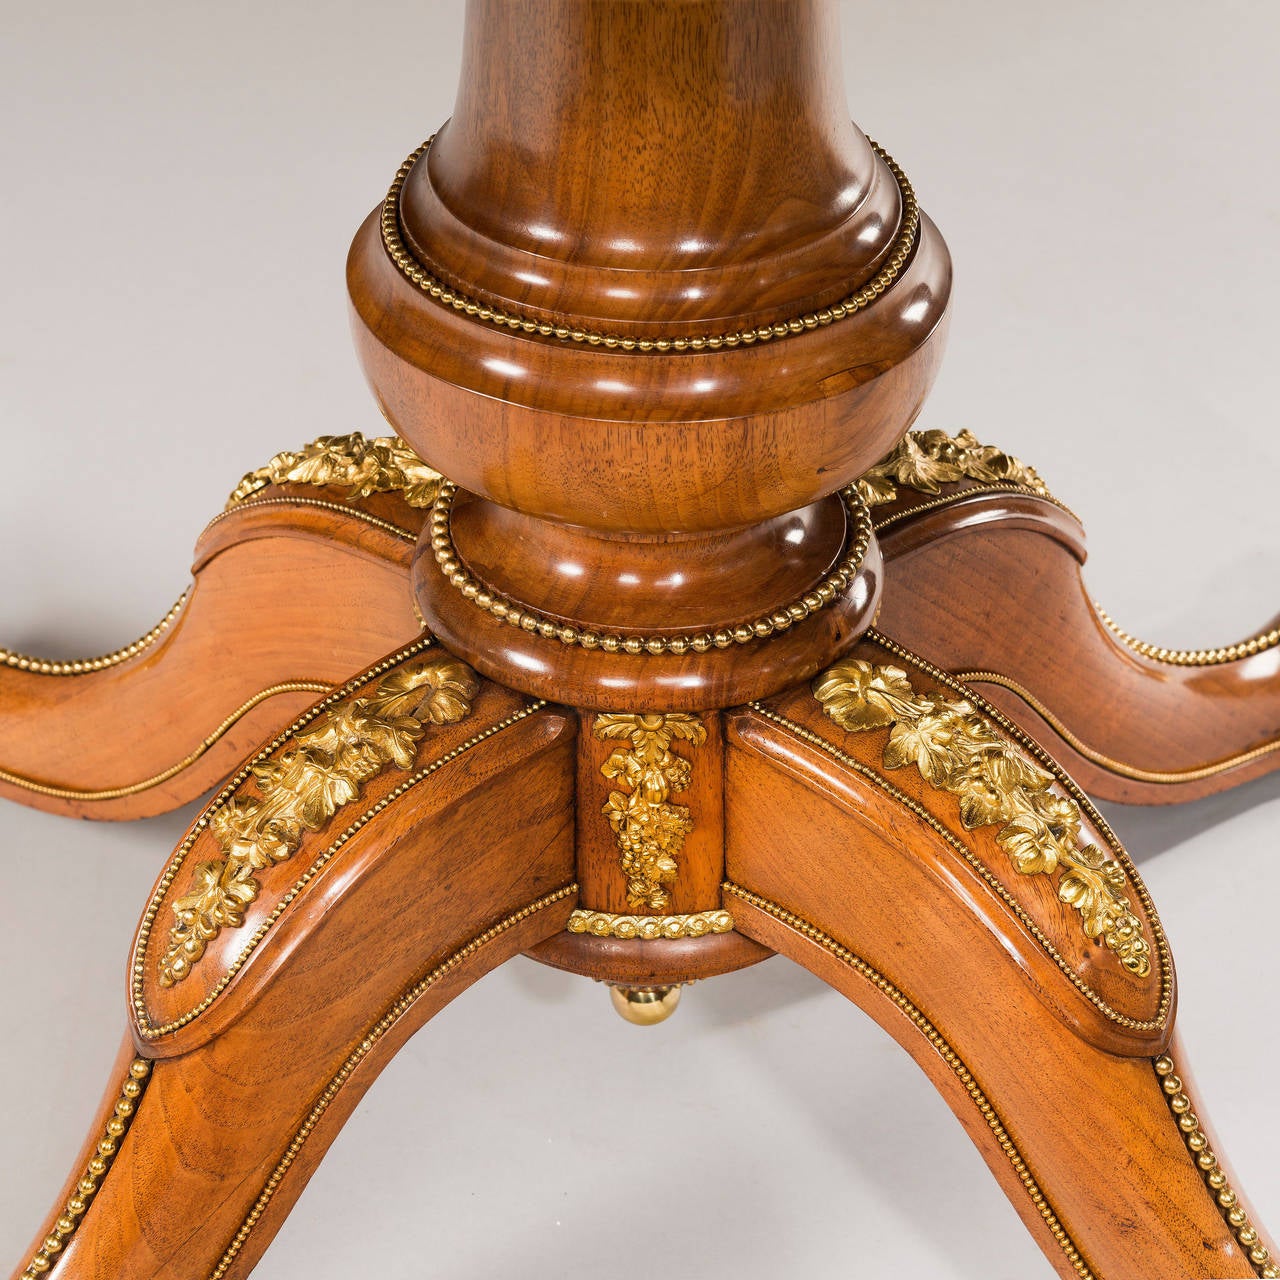 Burr Walnut and Ormolu-Mounted Centre Table with Superb Quartered Veneered Top In Good Condition For Sale In Lymington, Hampshire